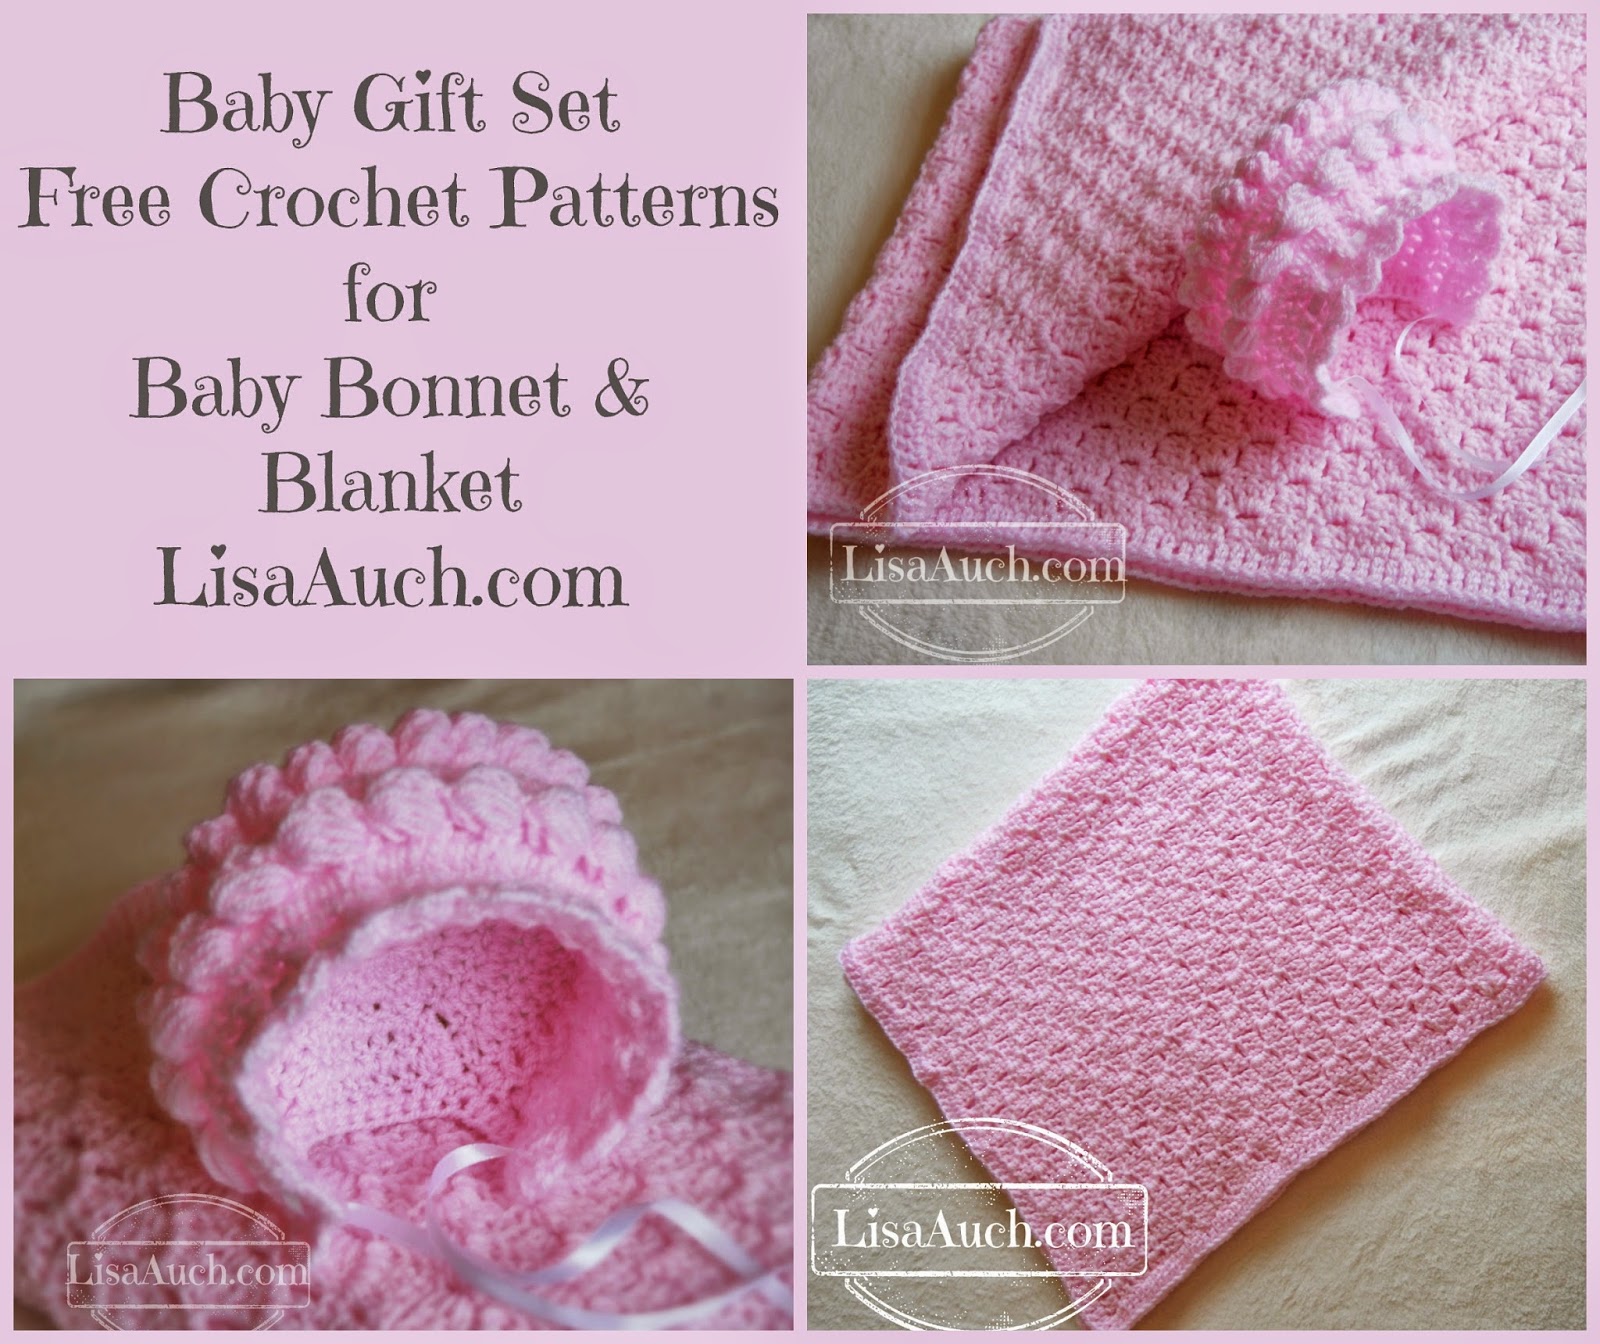 Easy Baby Sets - Free Crochet Patterns